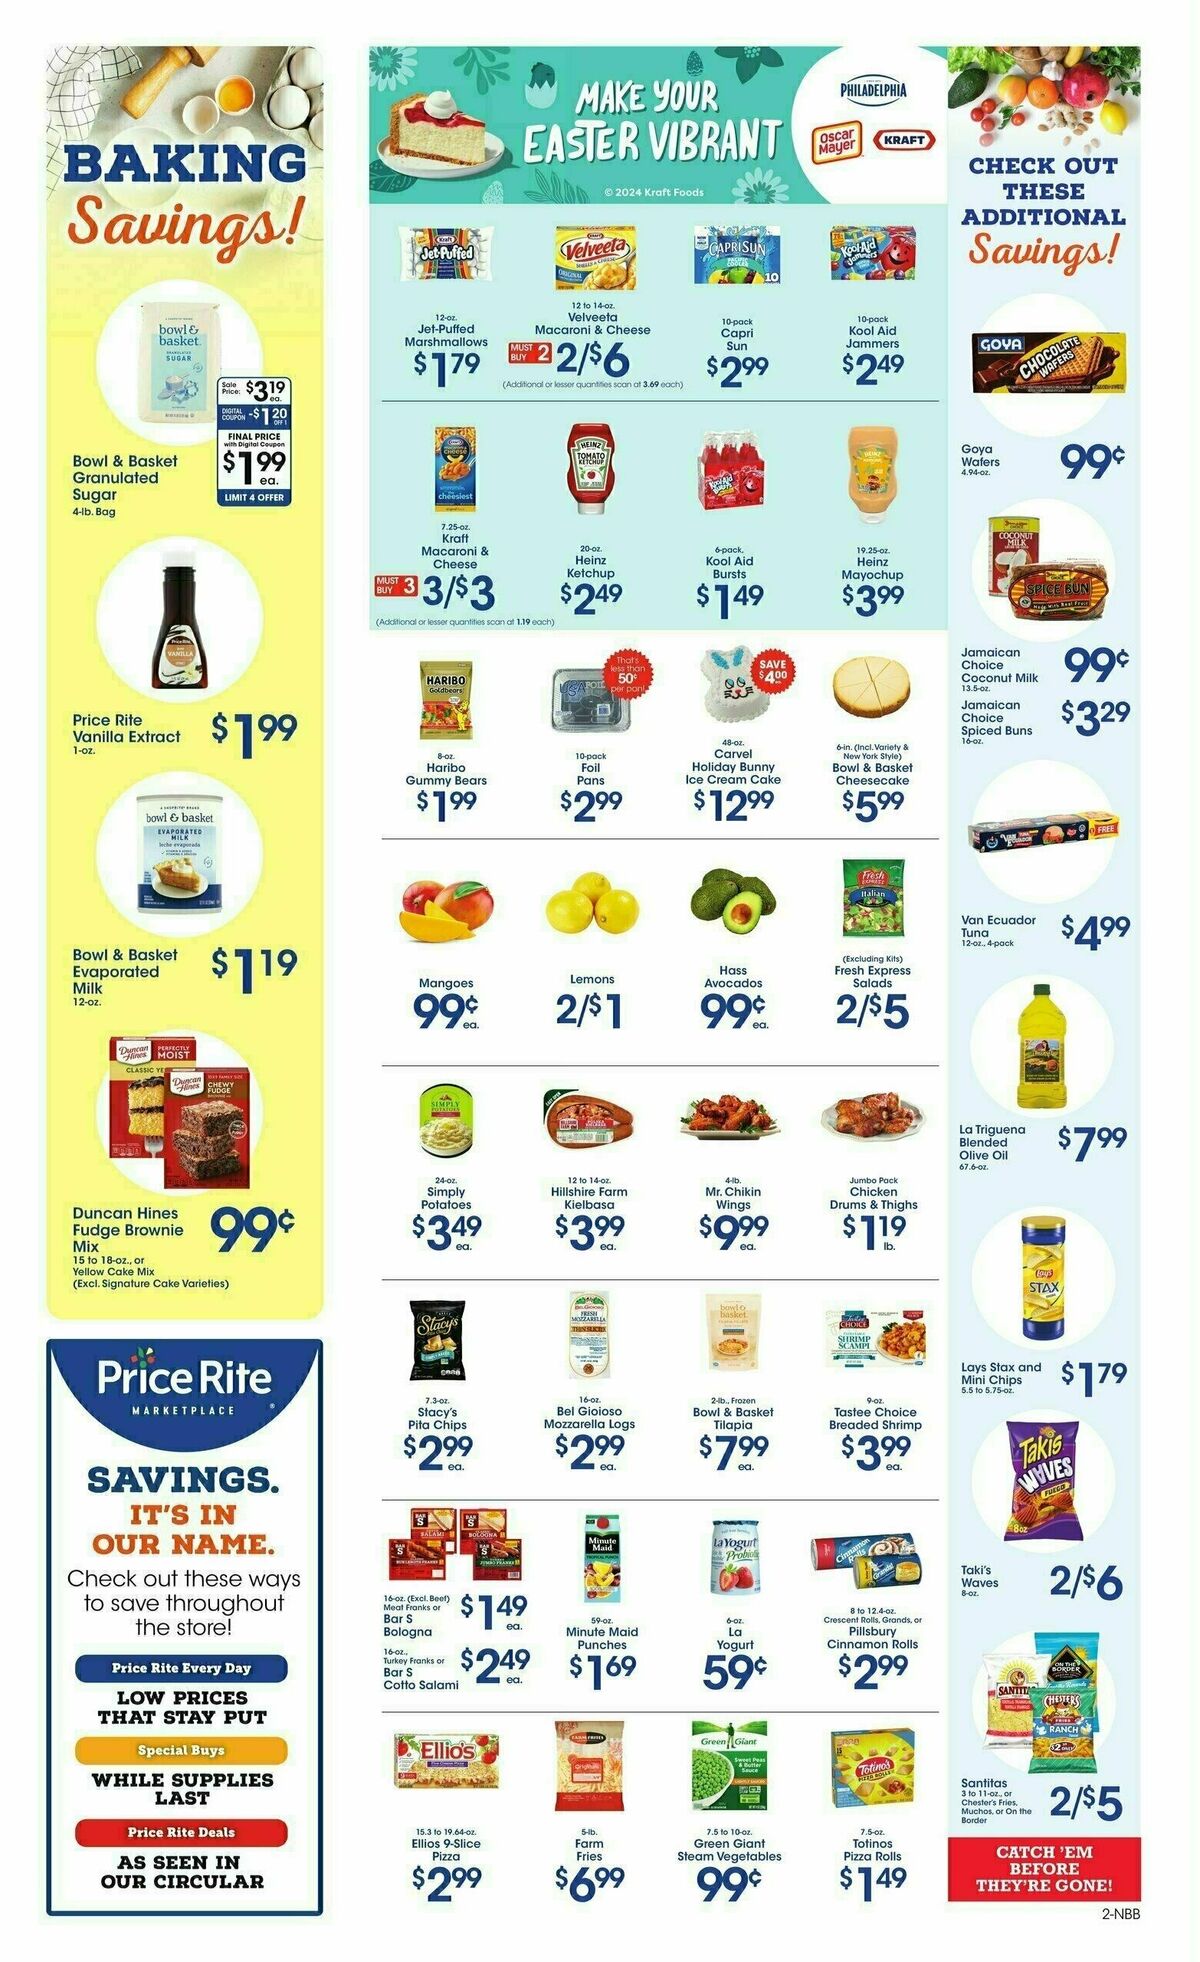 Price Rite Weekly Ad from March 22